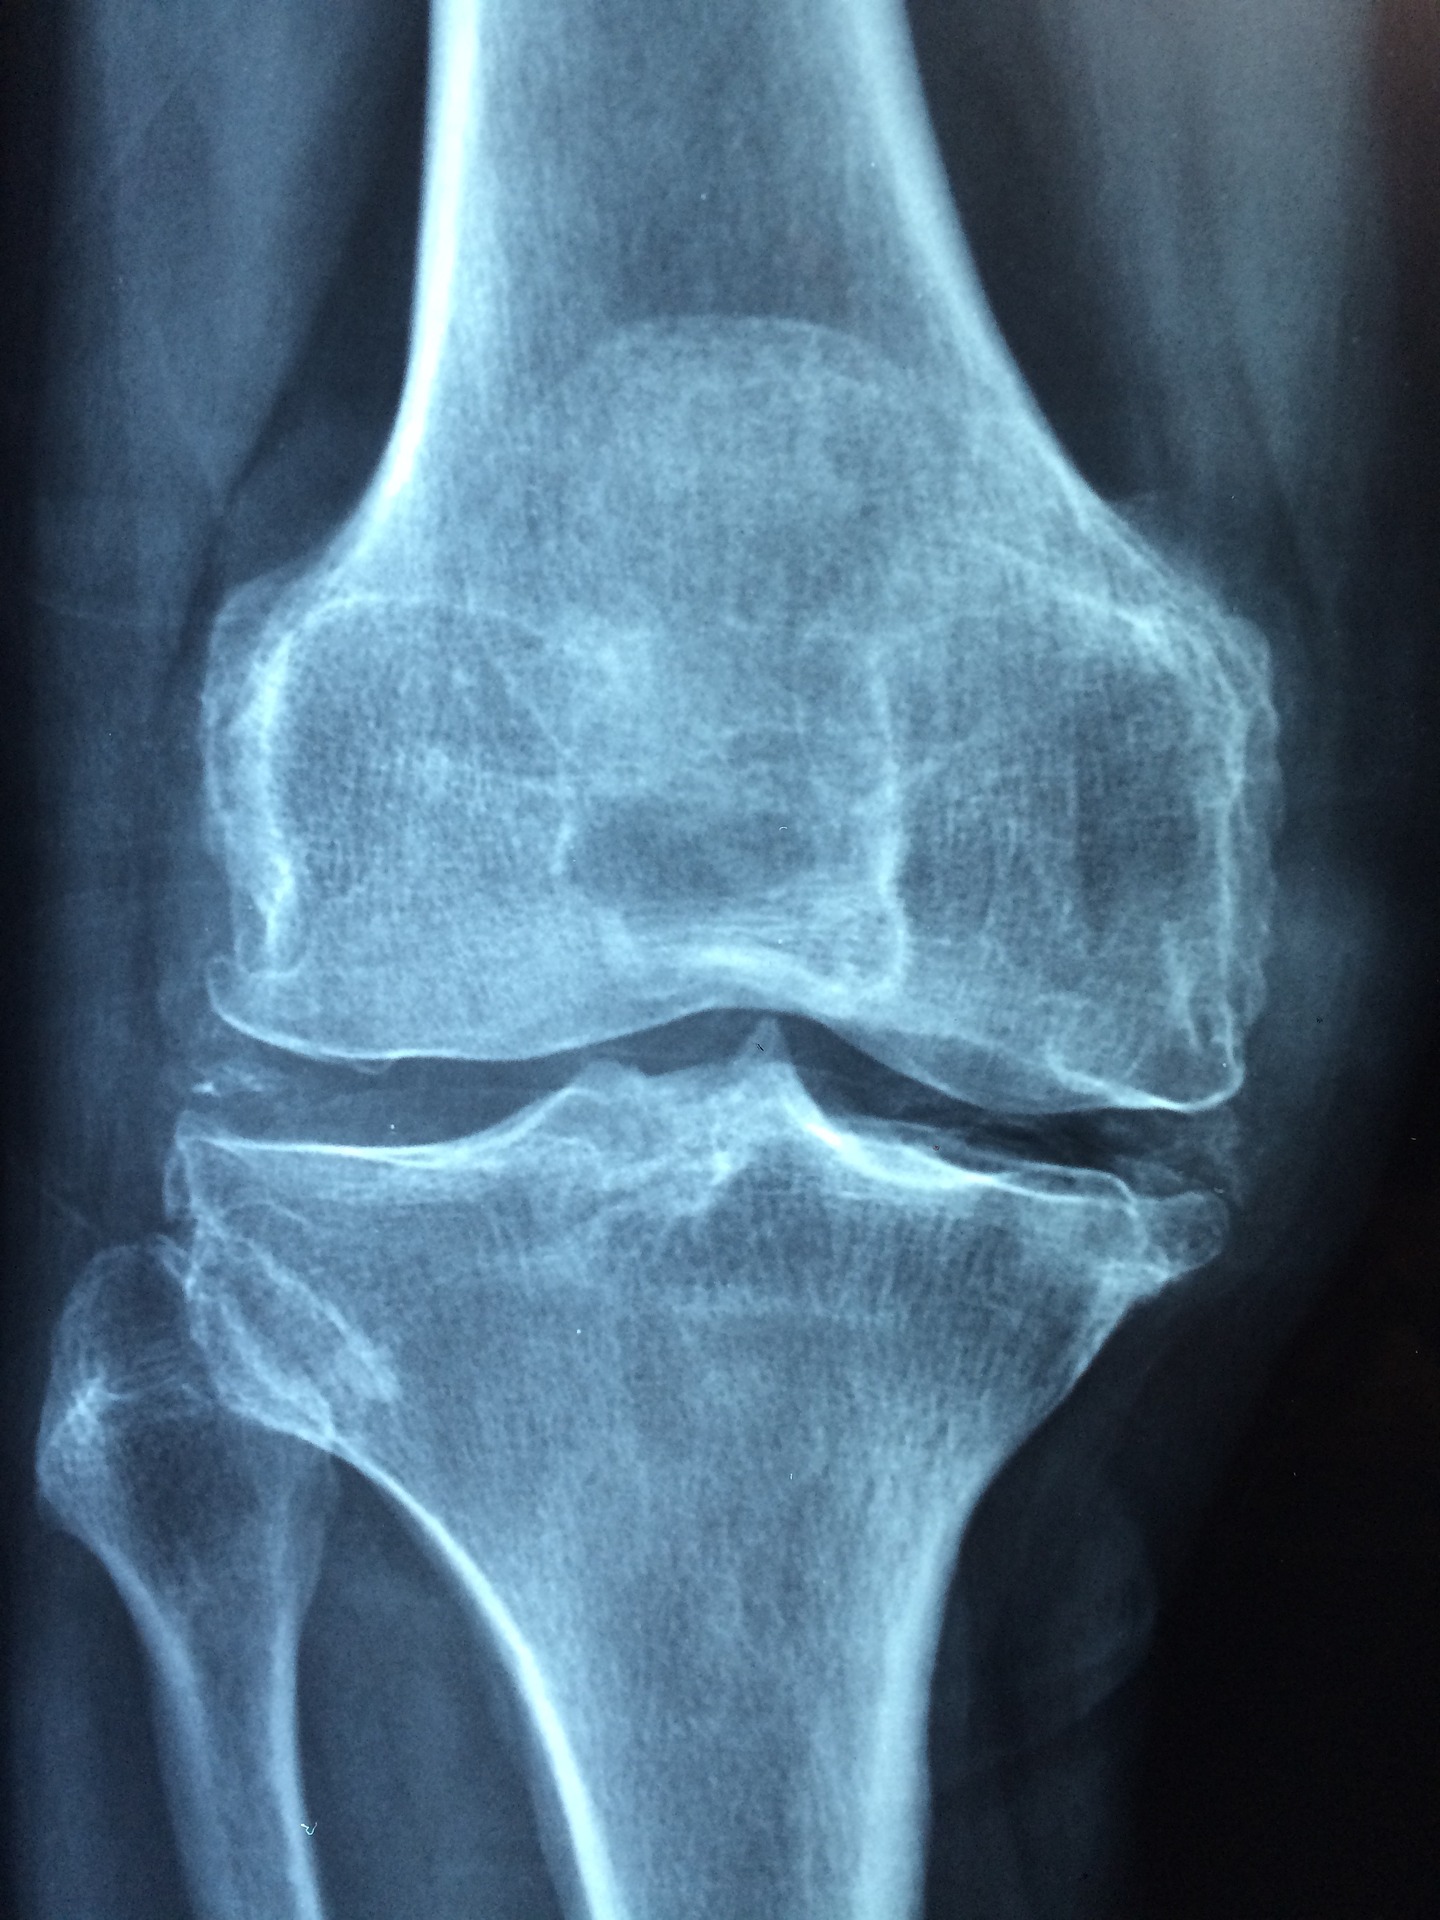 X-ray of a knee joint